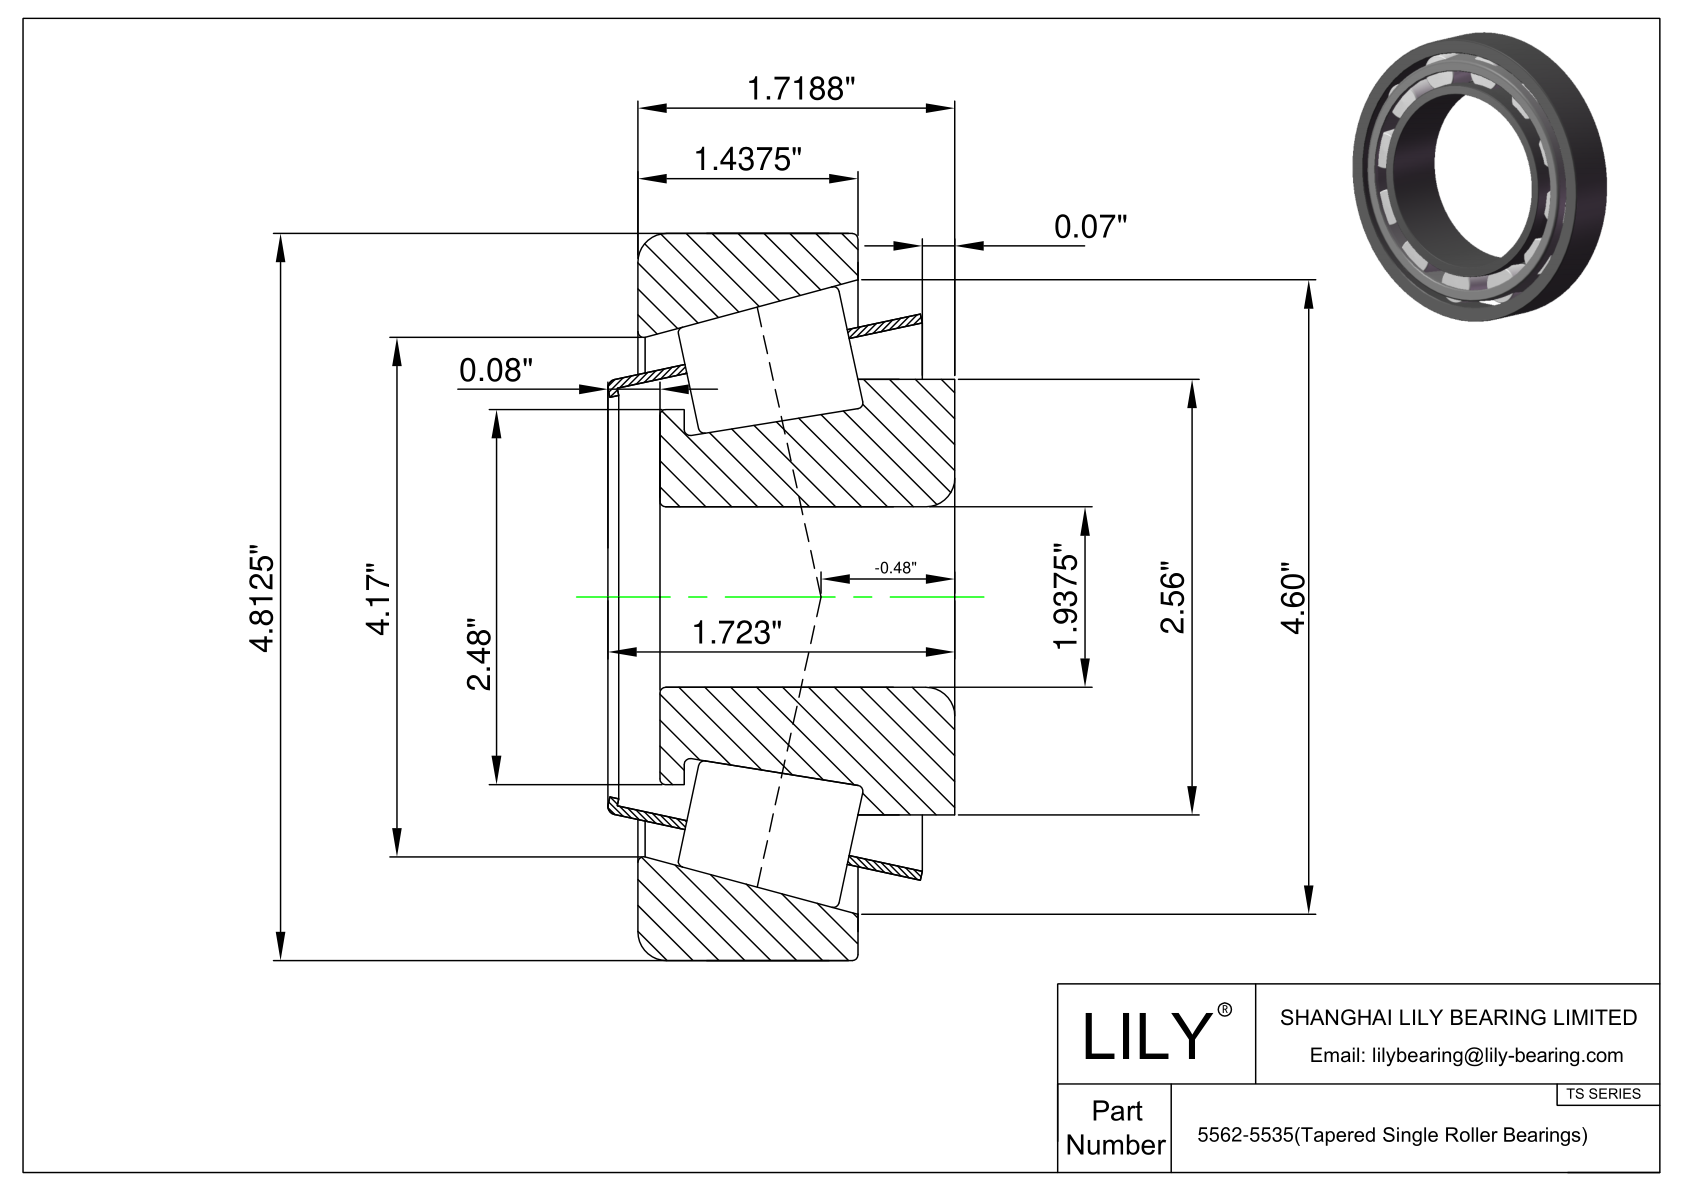 5562-5535 TS (Tapered Single Roller Bearings) (Imperial) cad drawing